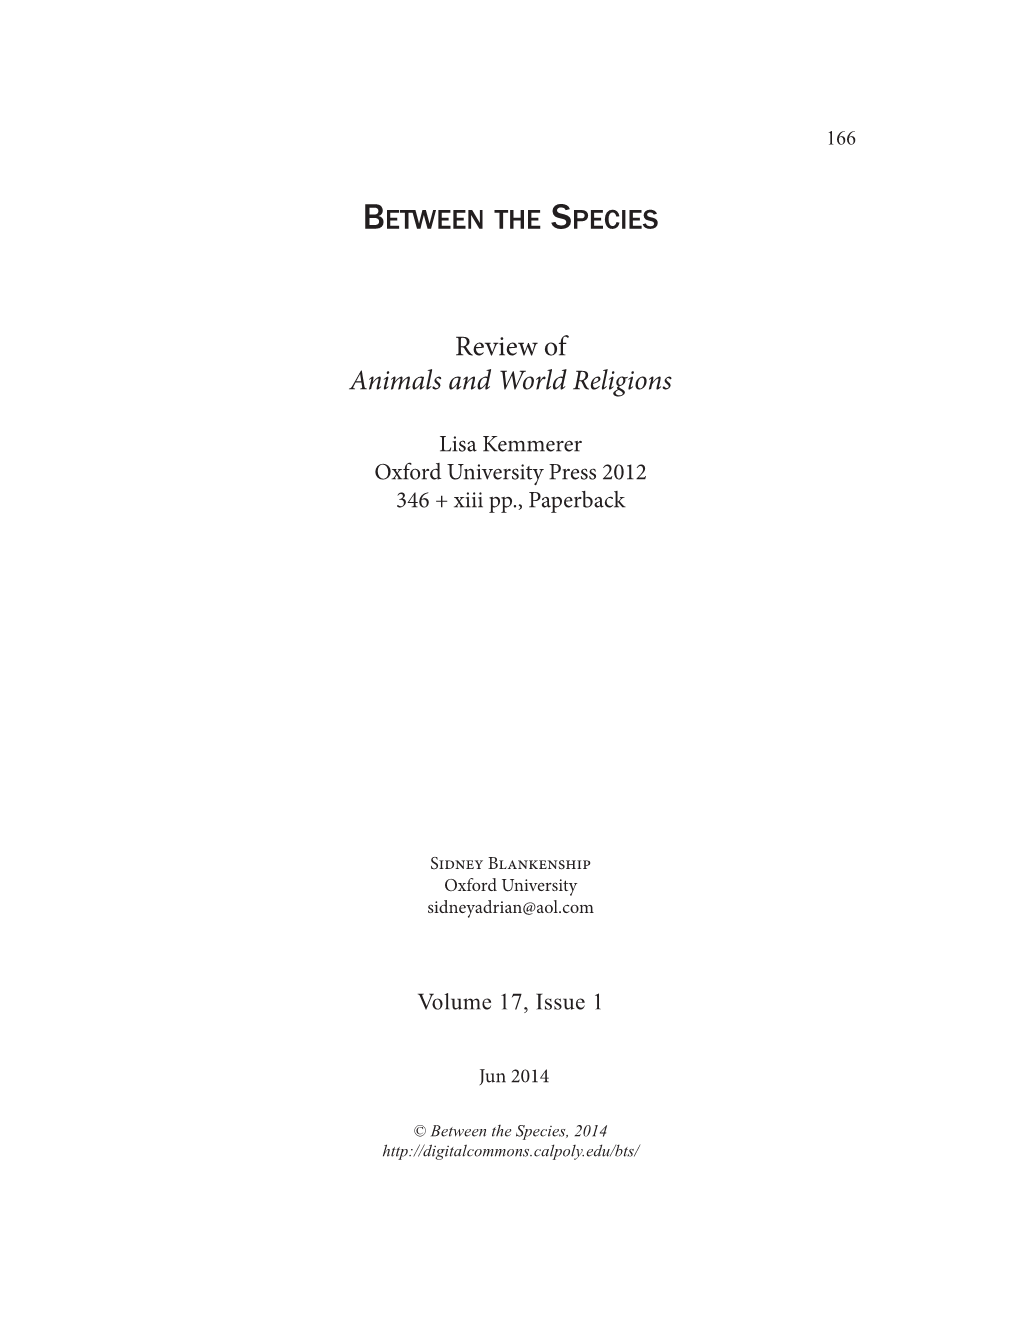 Review of Animals and World Religions